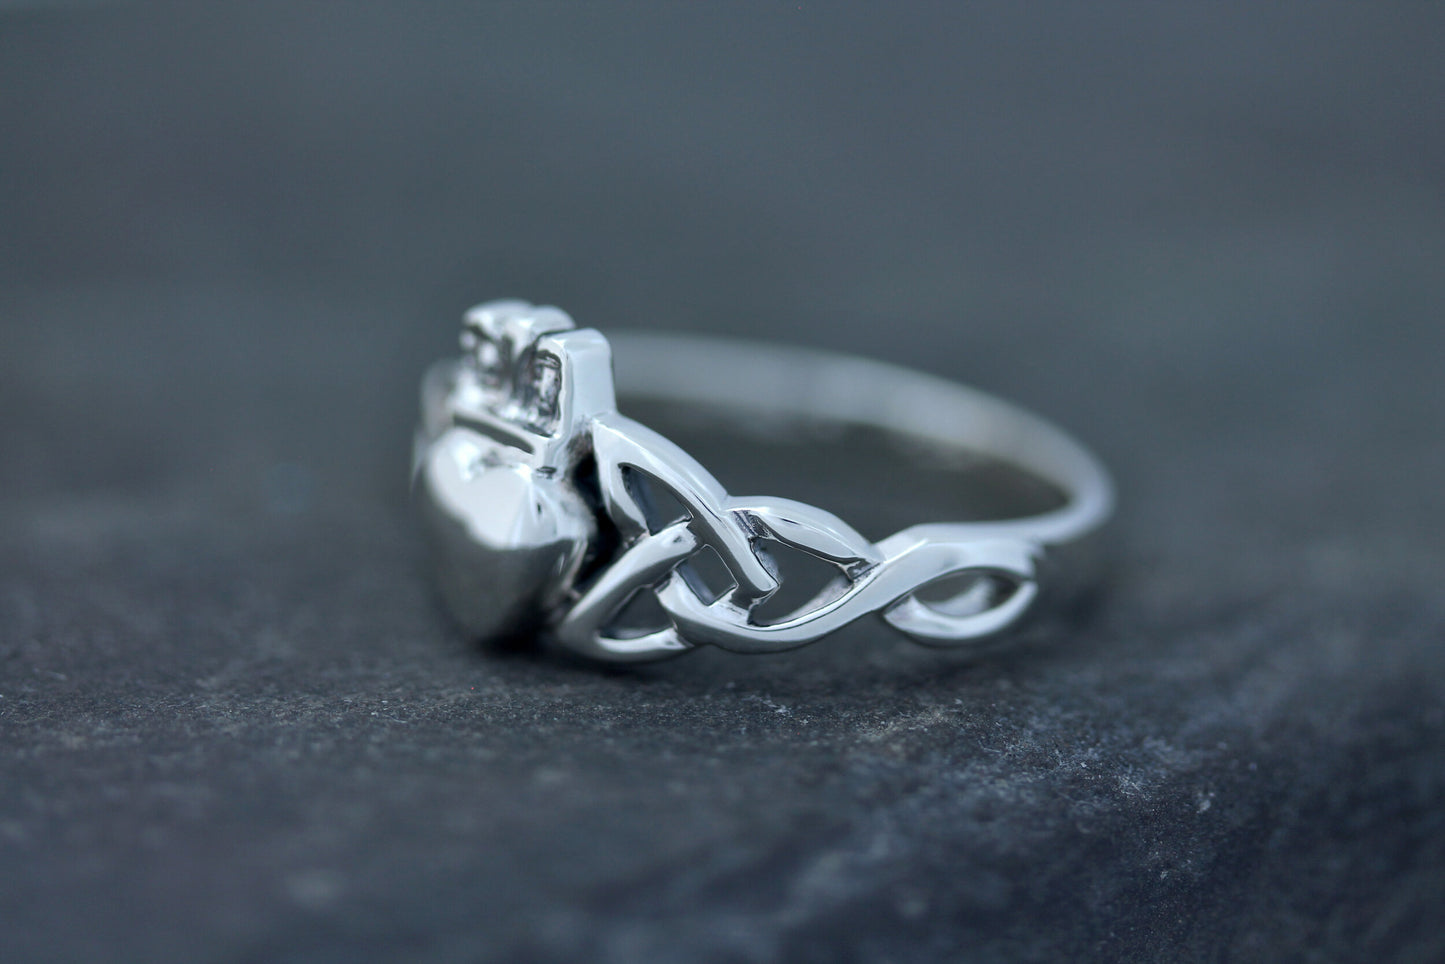 Claddagh Ring - Looped Trinity Arms with Solid Crown